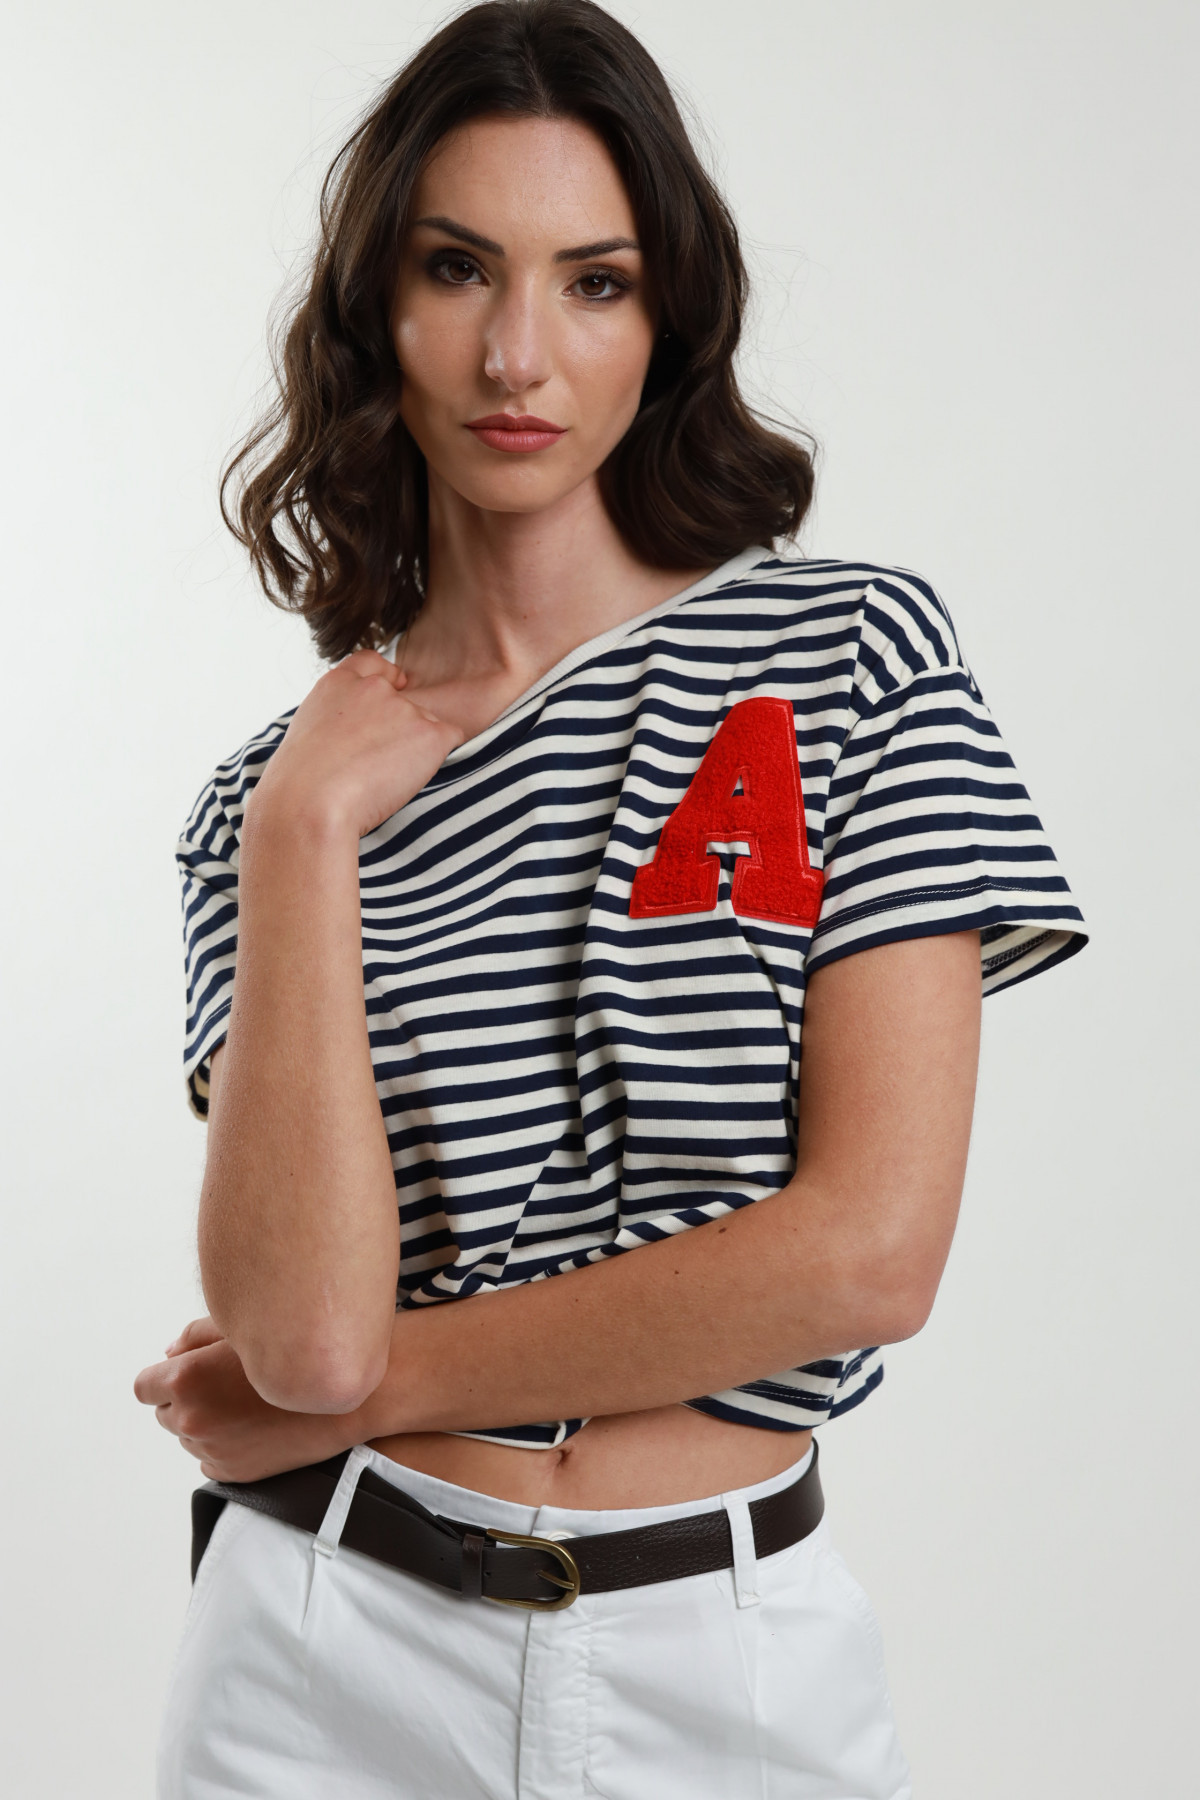 Striped shirt with patch